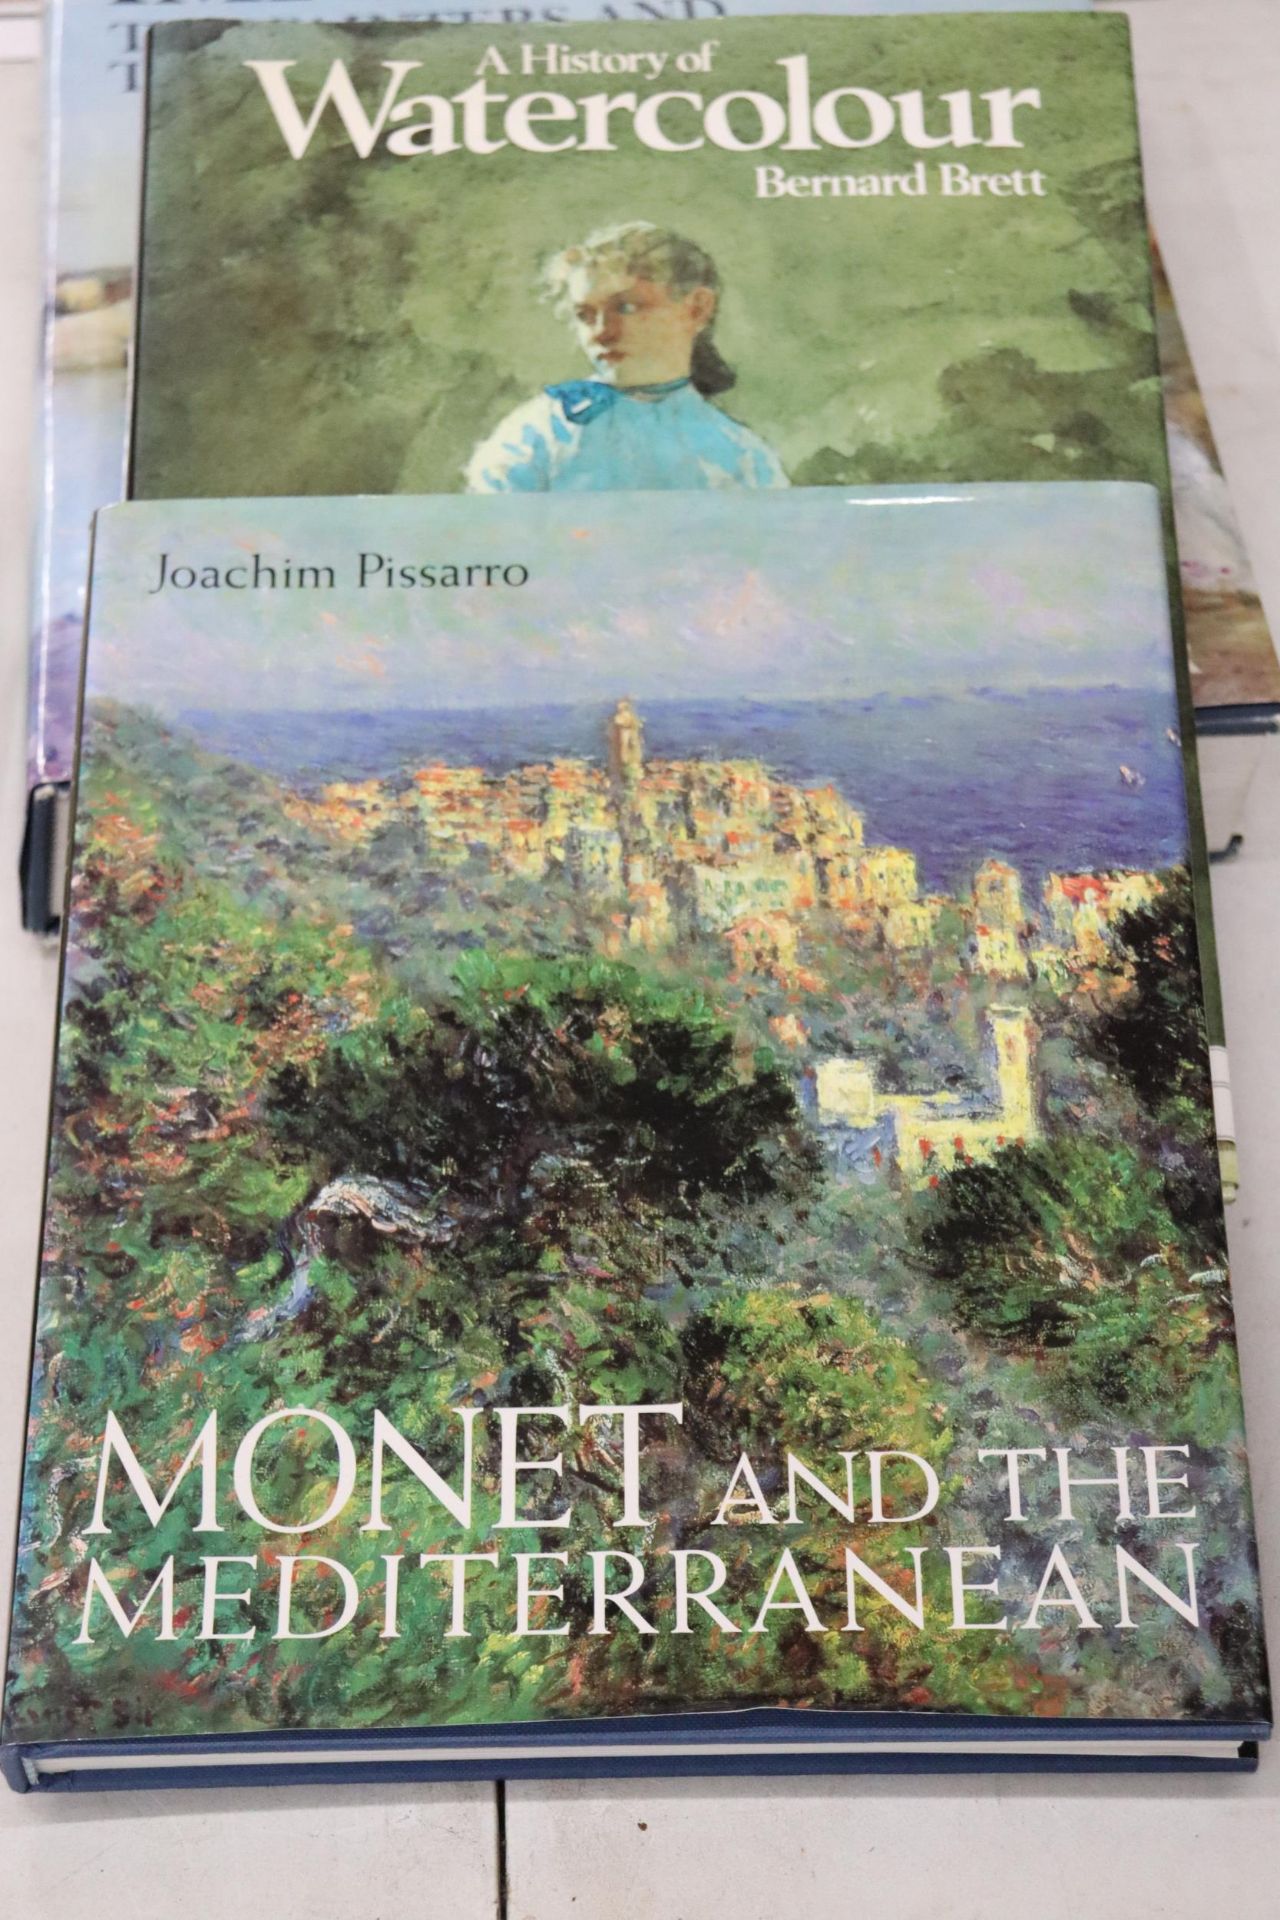 THREE HARDBACK ART THEMED BOOKS TO INCLUDE MONET AND THE MEDITERRANEAN, A HISTORY OF WATERCOLOUR AND - Image 2 of 6